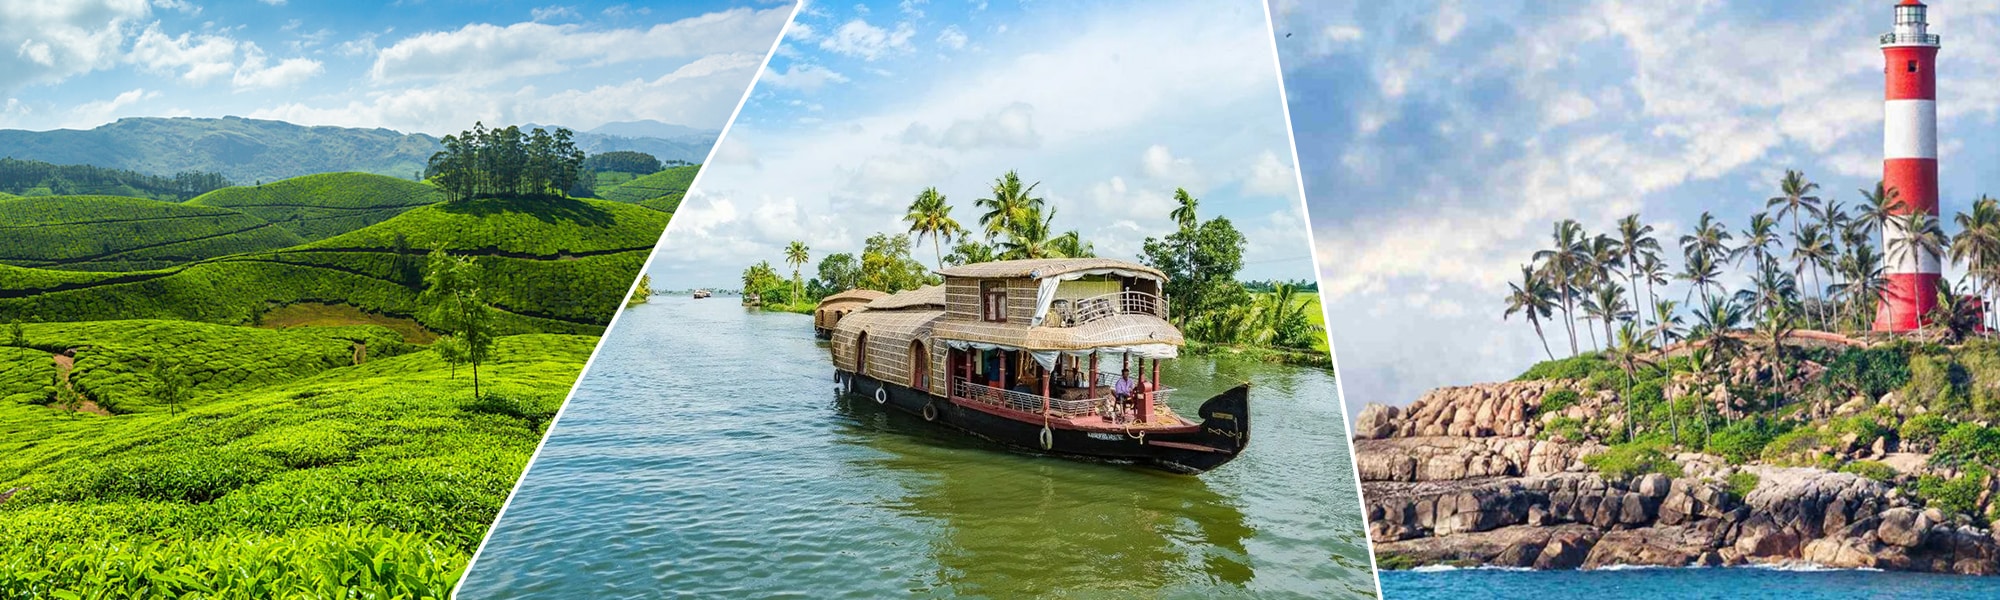 kerala tour packages 7 days